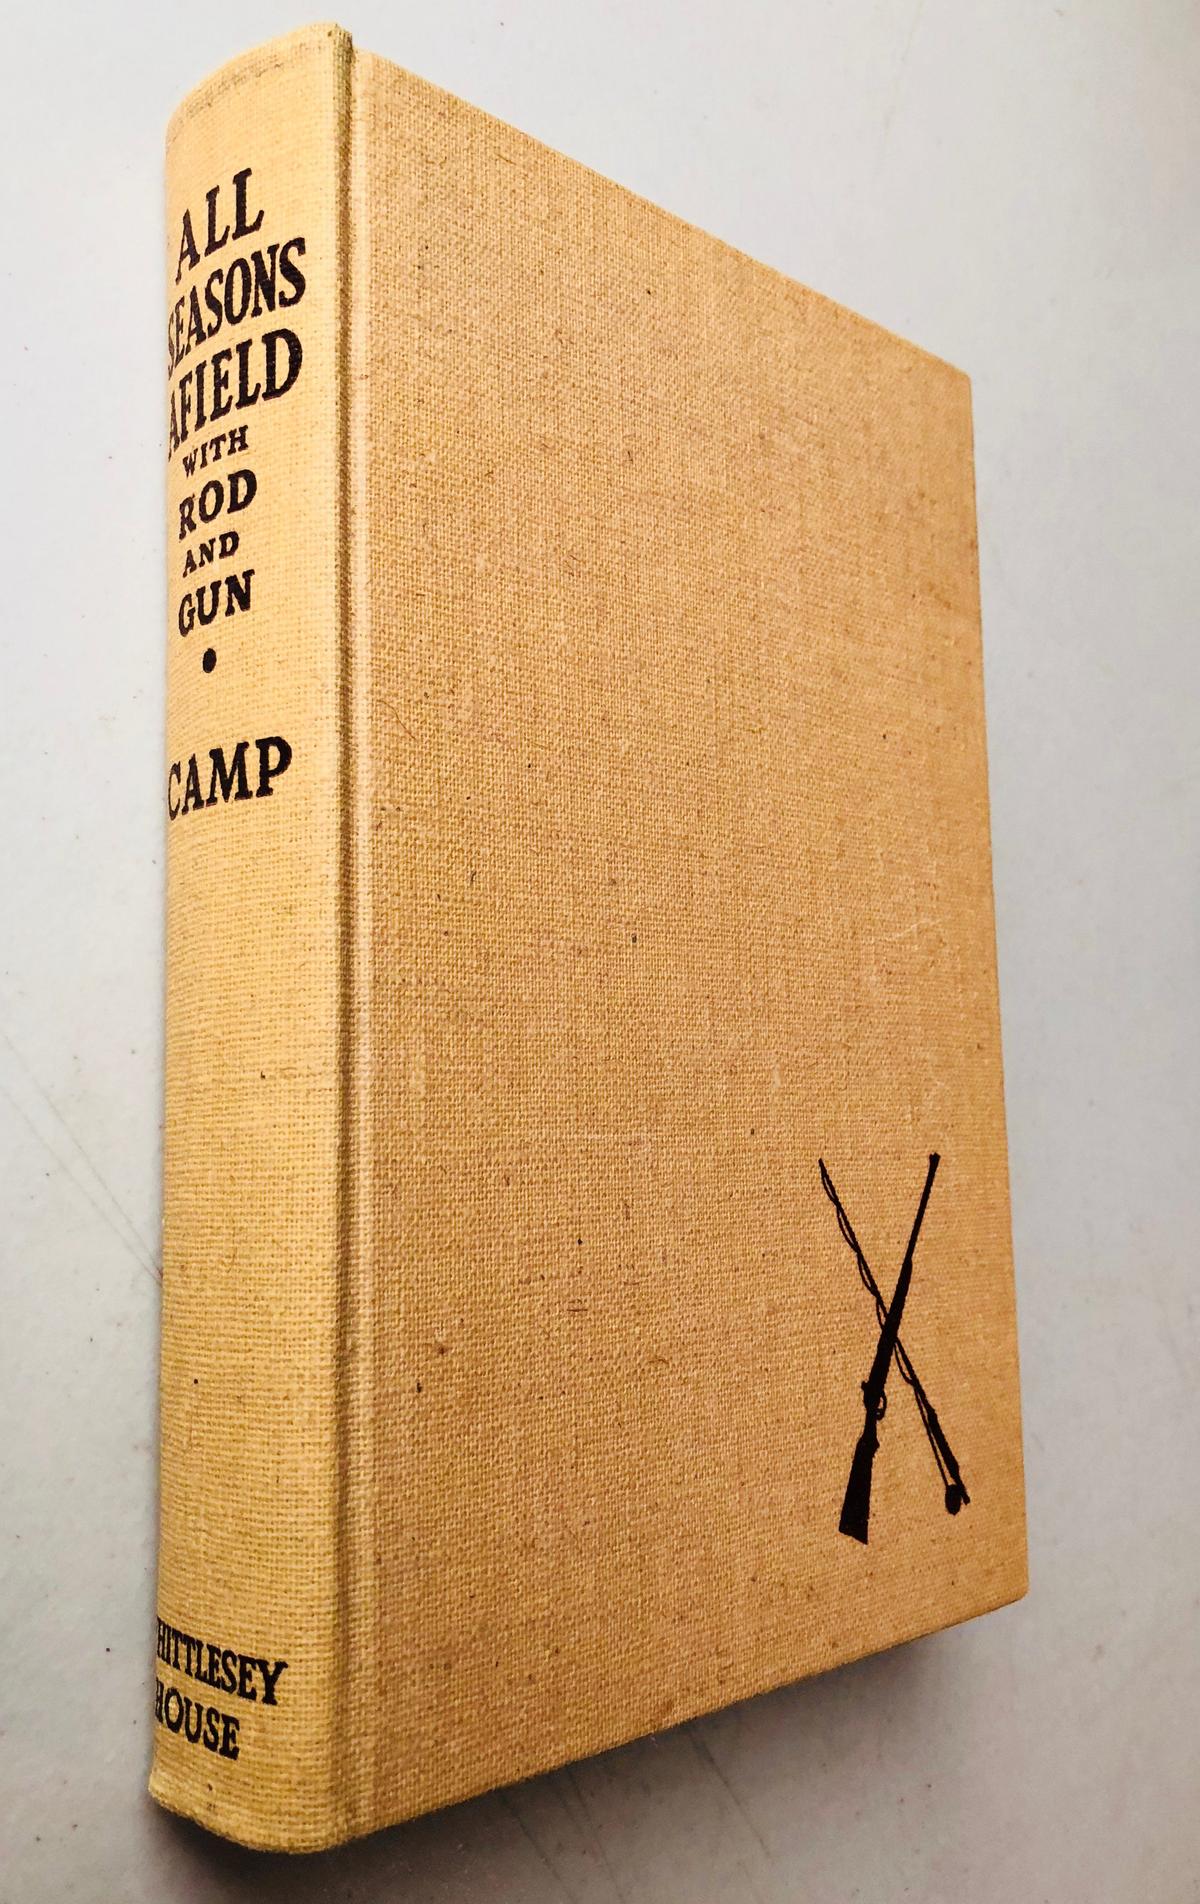 All Seasons Afield With Rod and Gun by Raymond R. Camp (1939) HUNTING FISHING